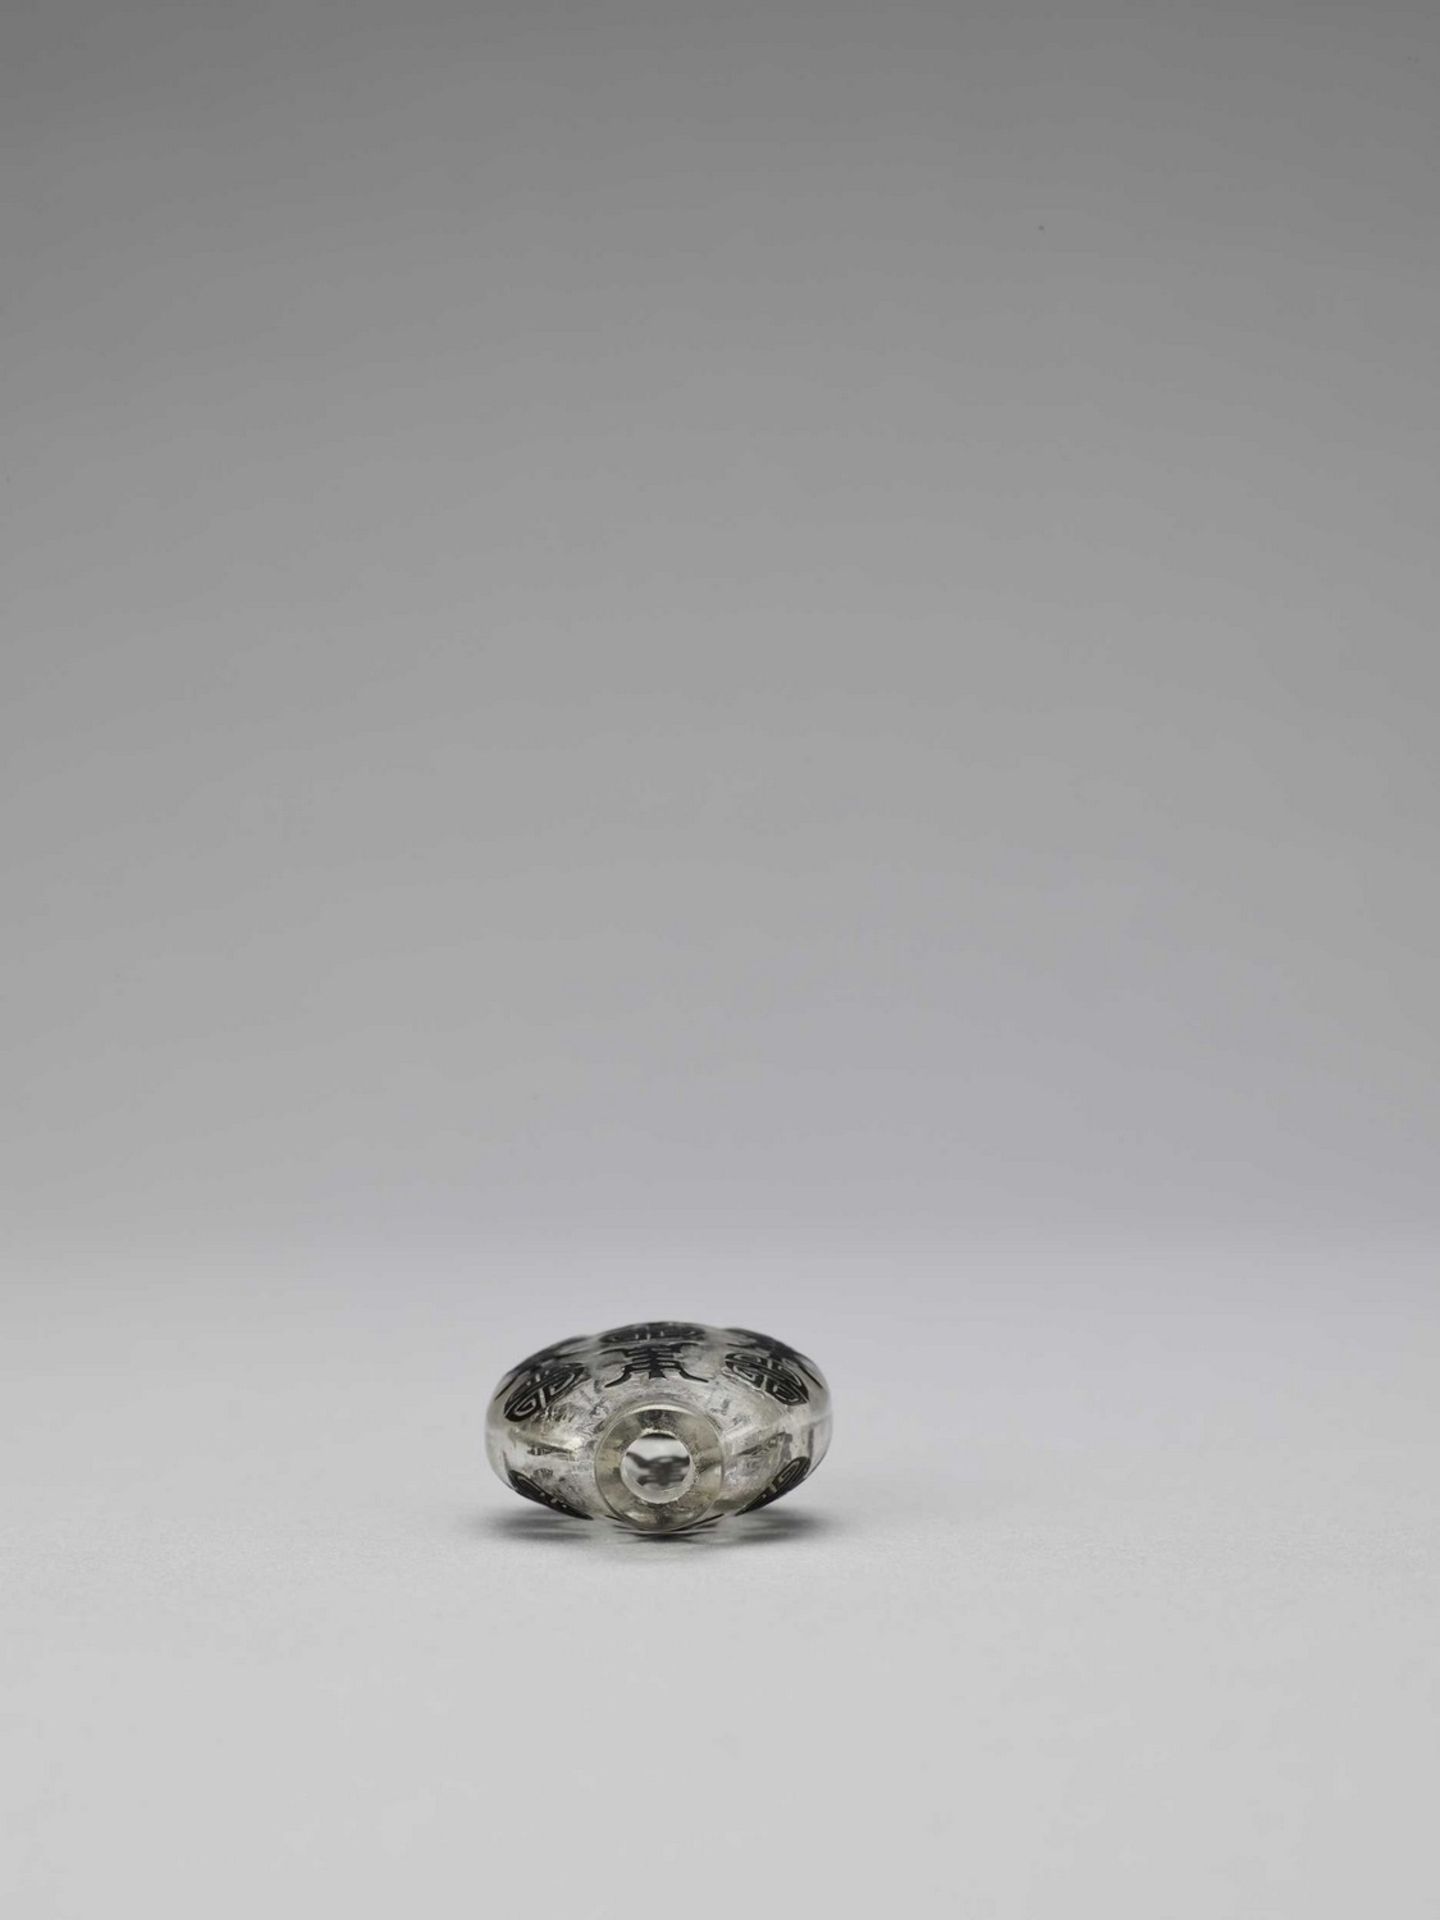 A BLACK OVERLAY GLASS ‘SHOU’ SNUFF BOTTLE, QING - Image 5 of 6